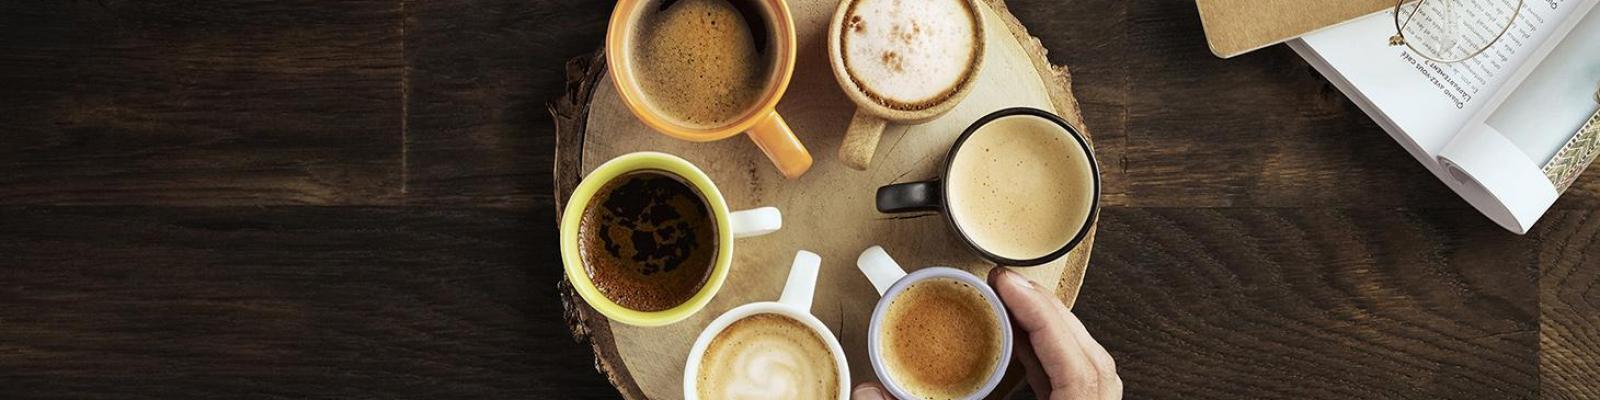 Our guide to coffee tasting